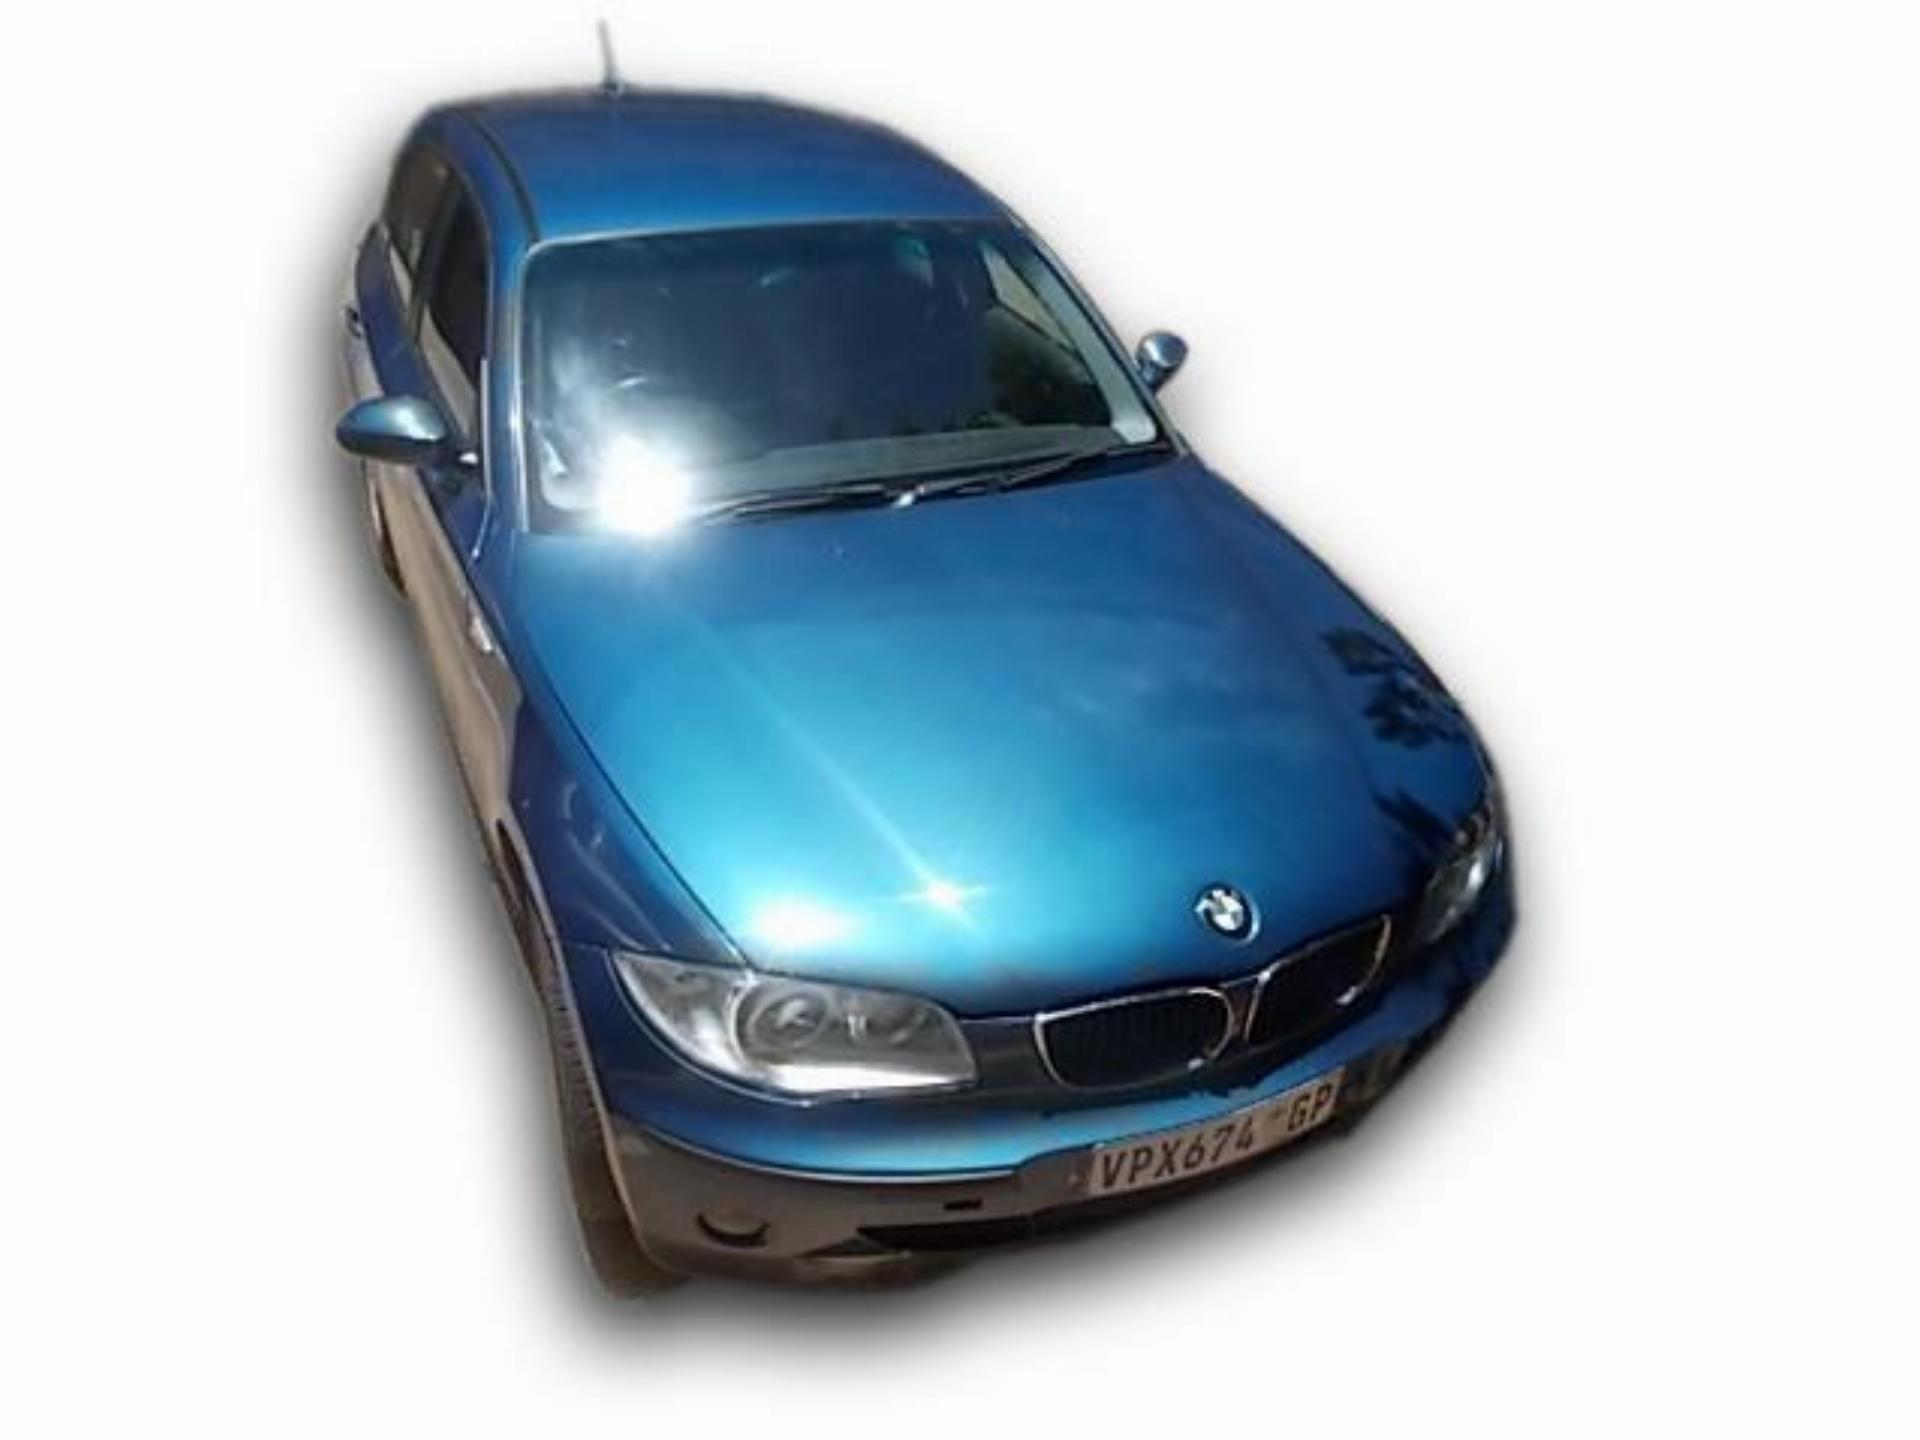 Used 1 Series 2007 BMW 118I (E87) 2007 on auction